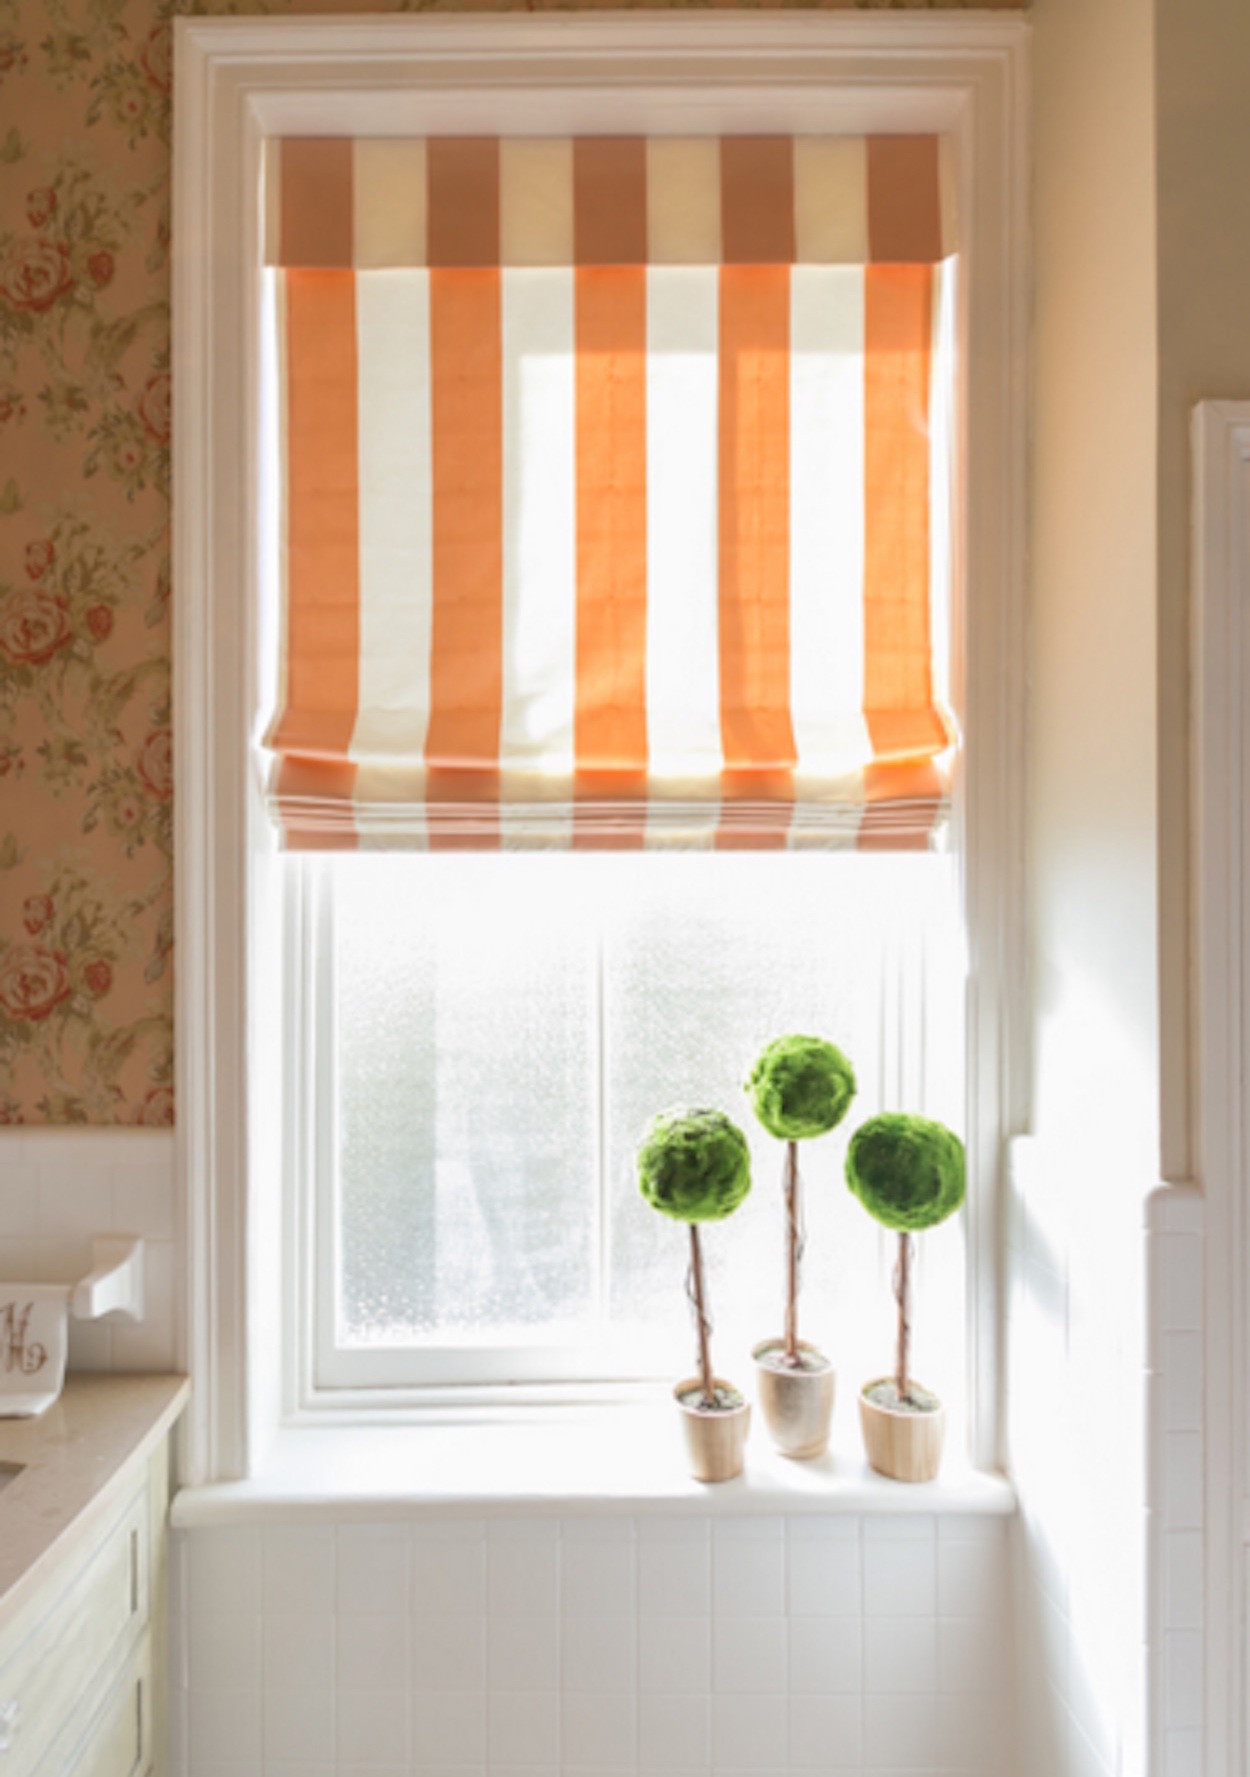 Small Bathroom Window Curtains
 7 Different Bathroom Window Treatments You Might Not Have